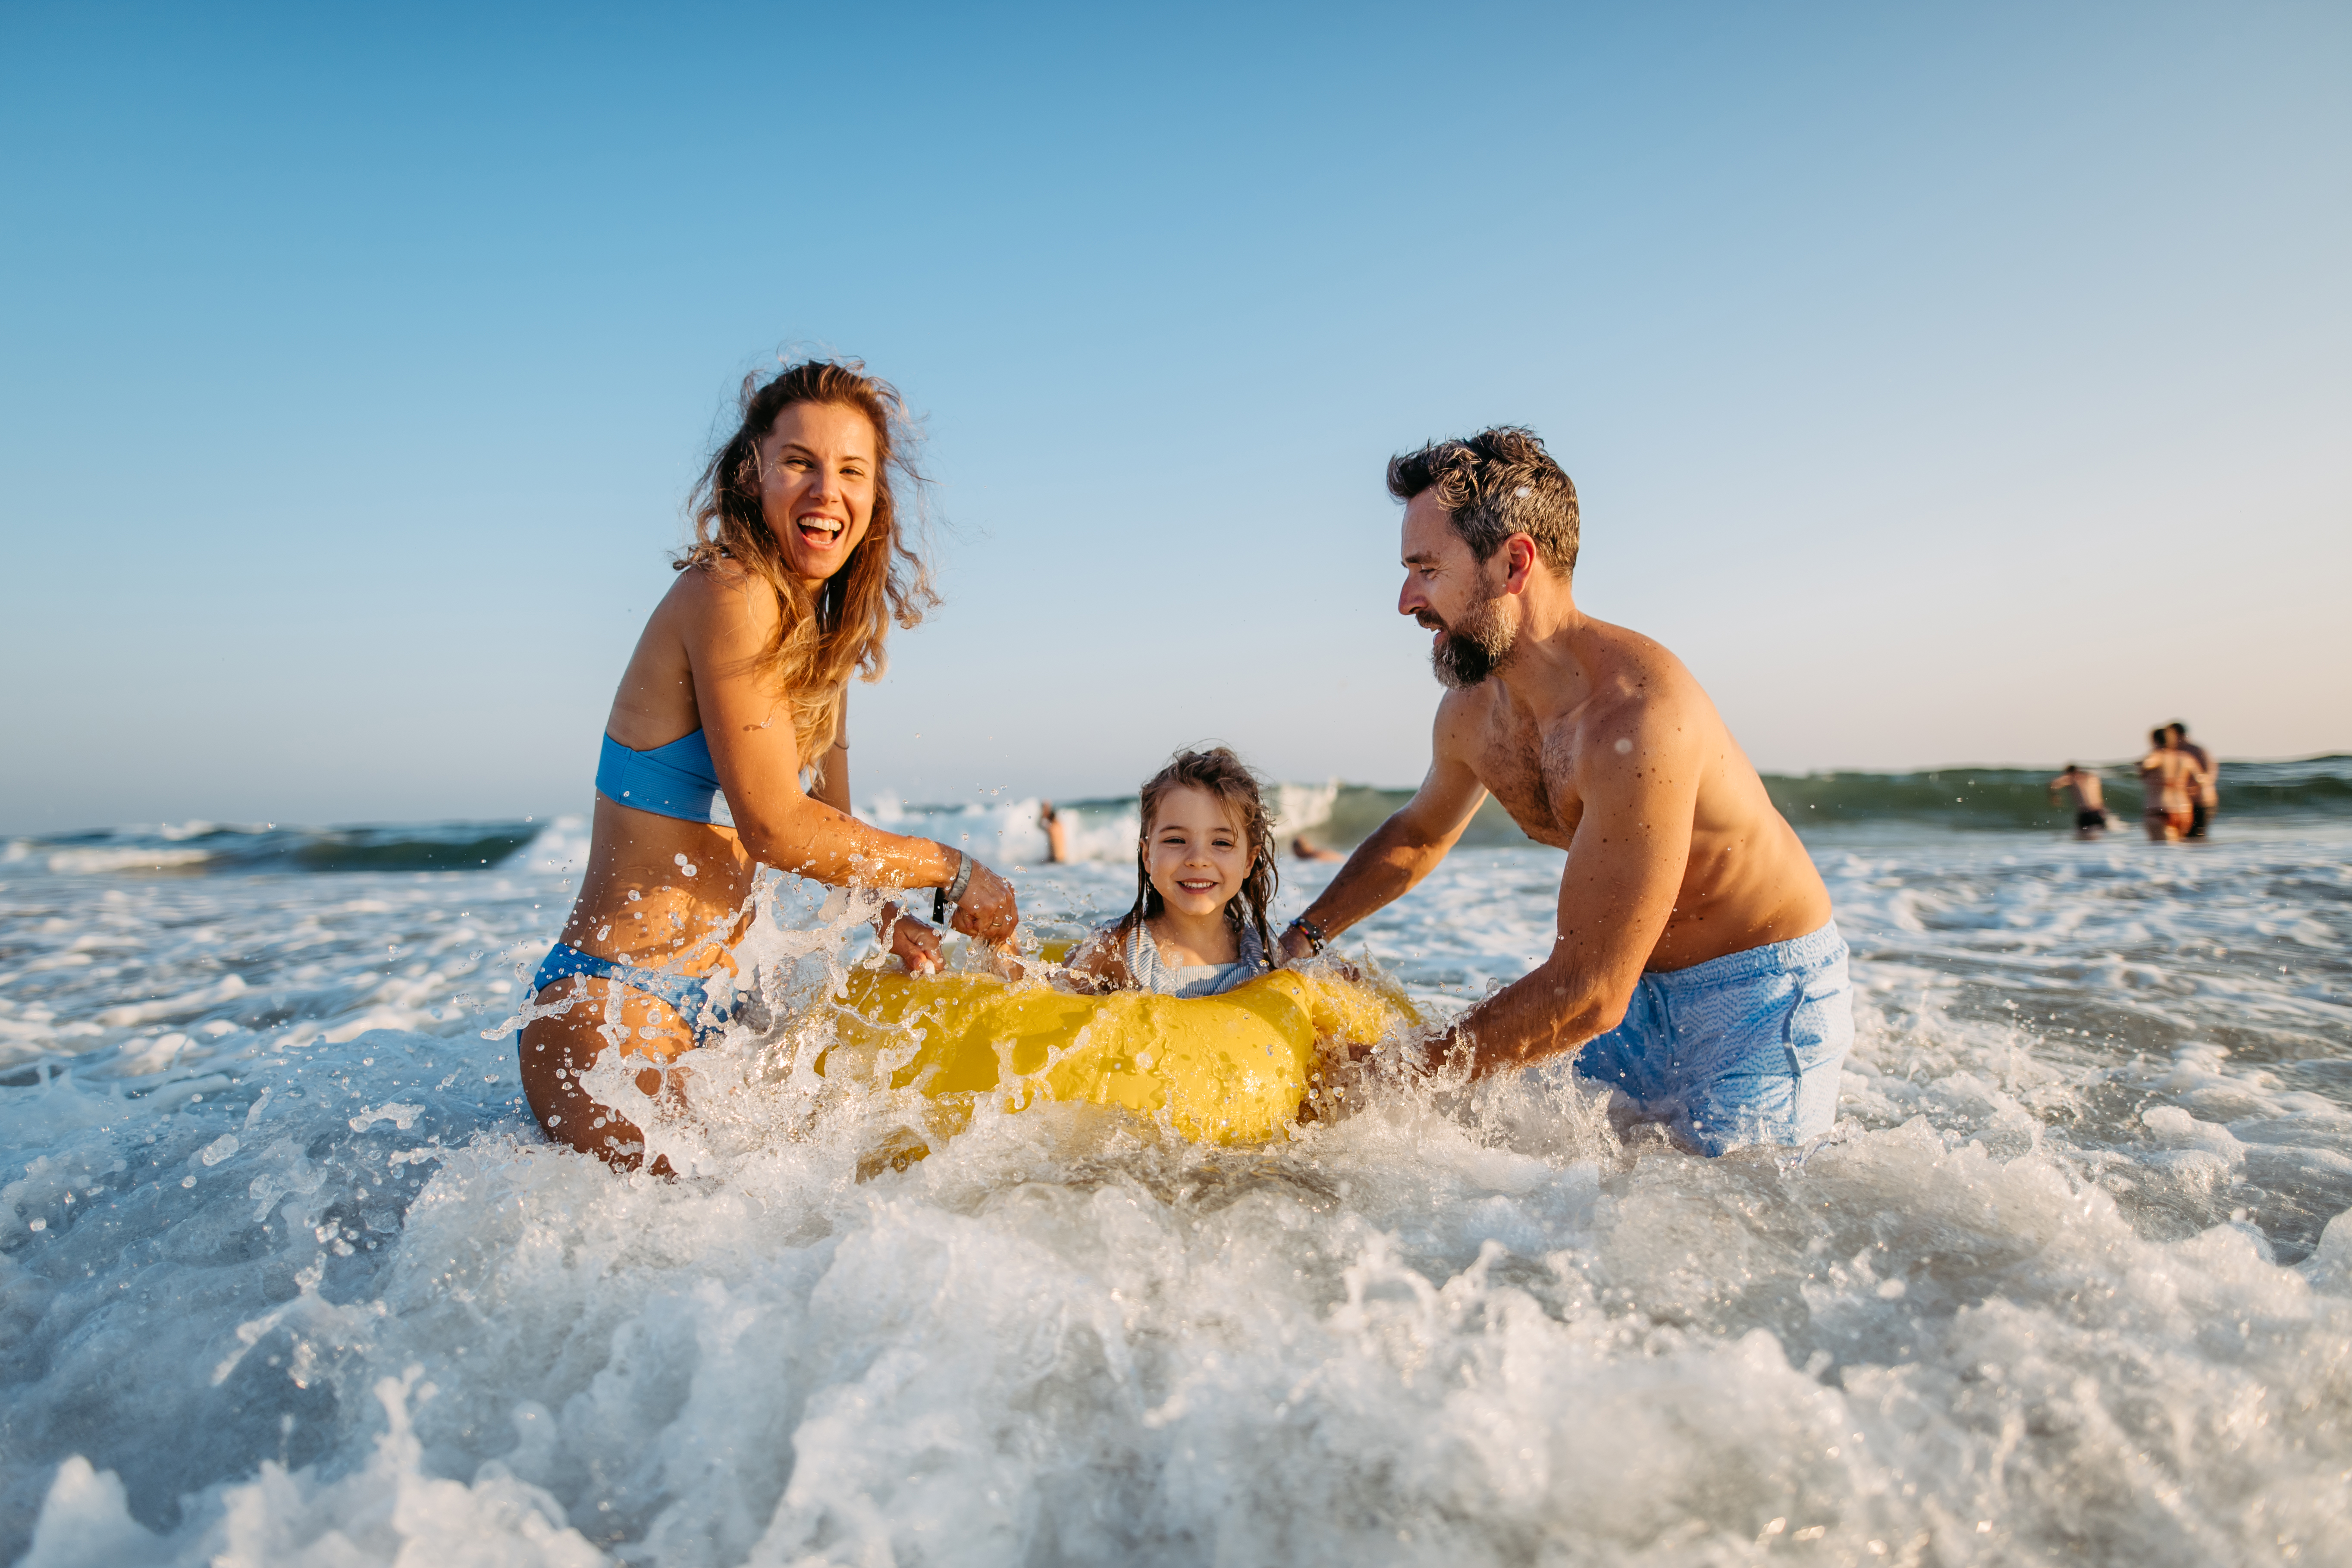 A happy family at the beach | Source: Getty Images